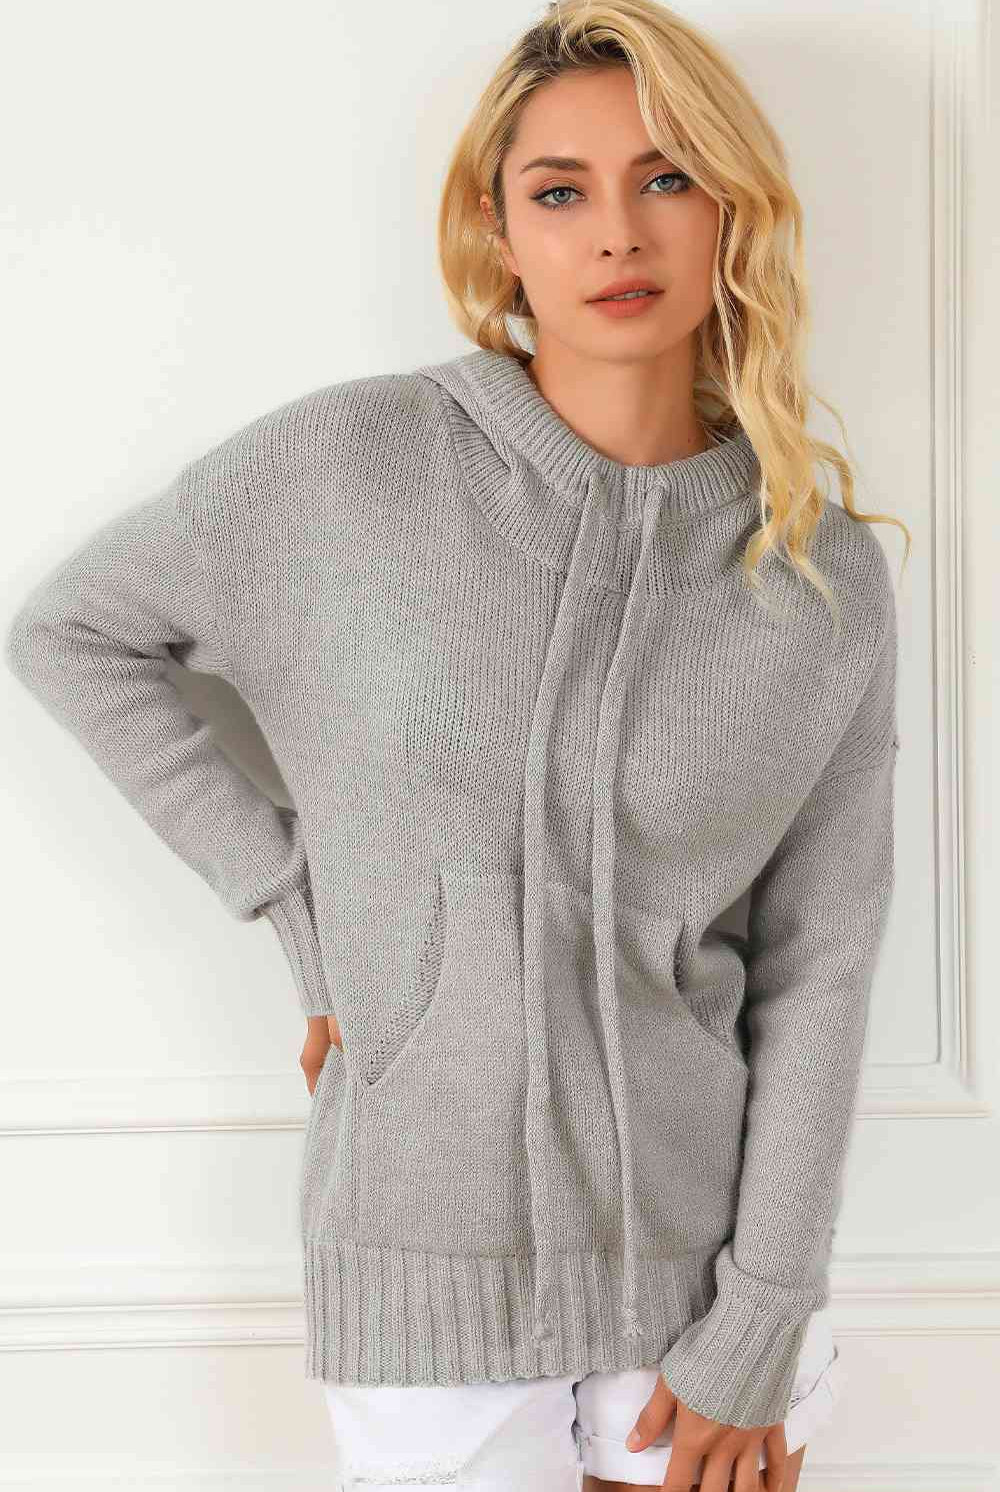 Drawstring Hooded Sweater with Pocket - GemThreads Boutique